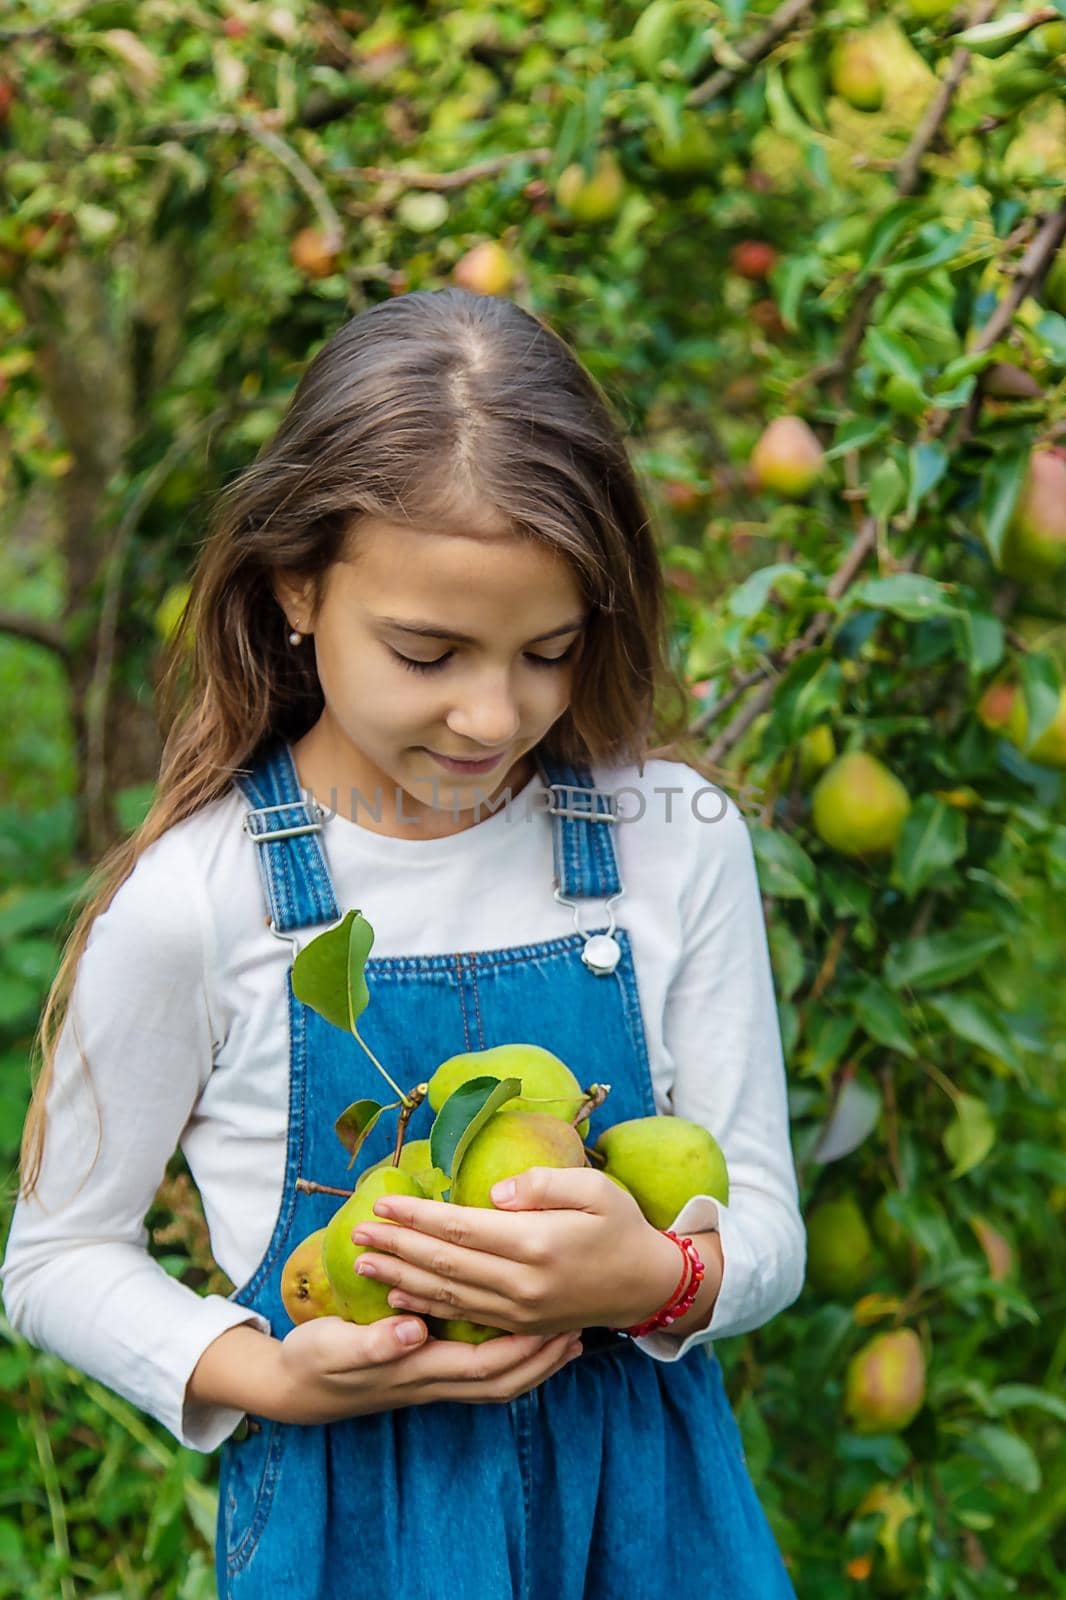 A child harvests pears in the garden. Selective focus. Food.